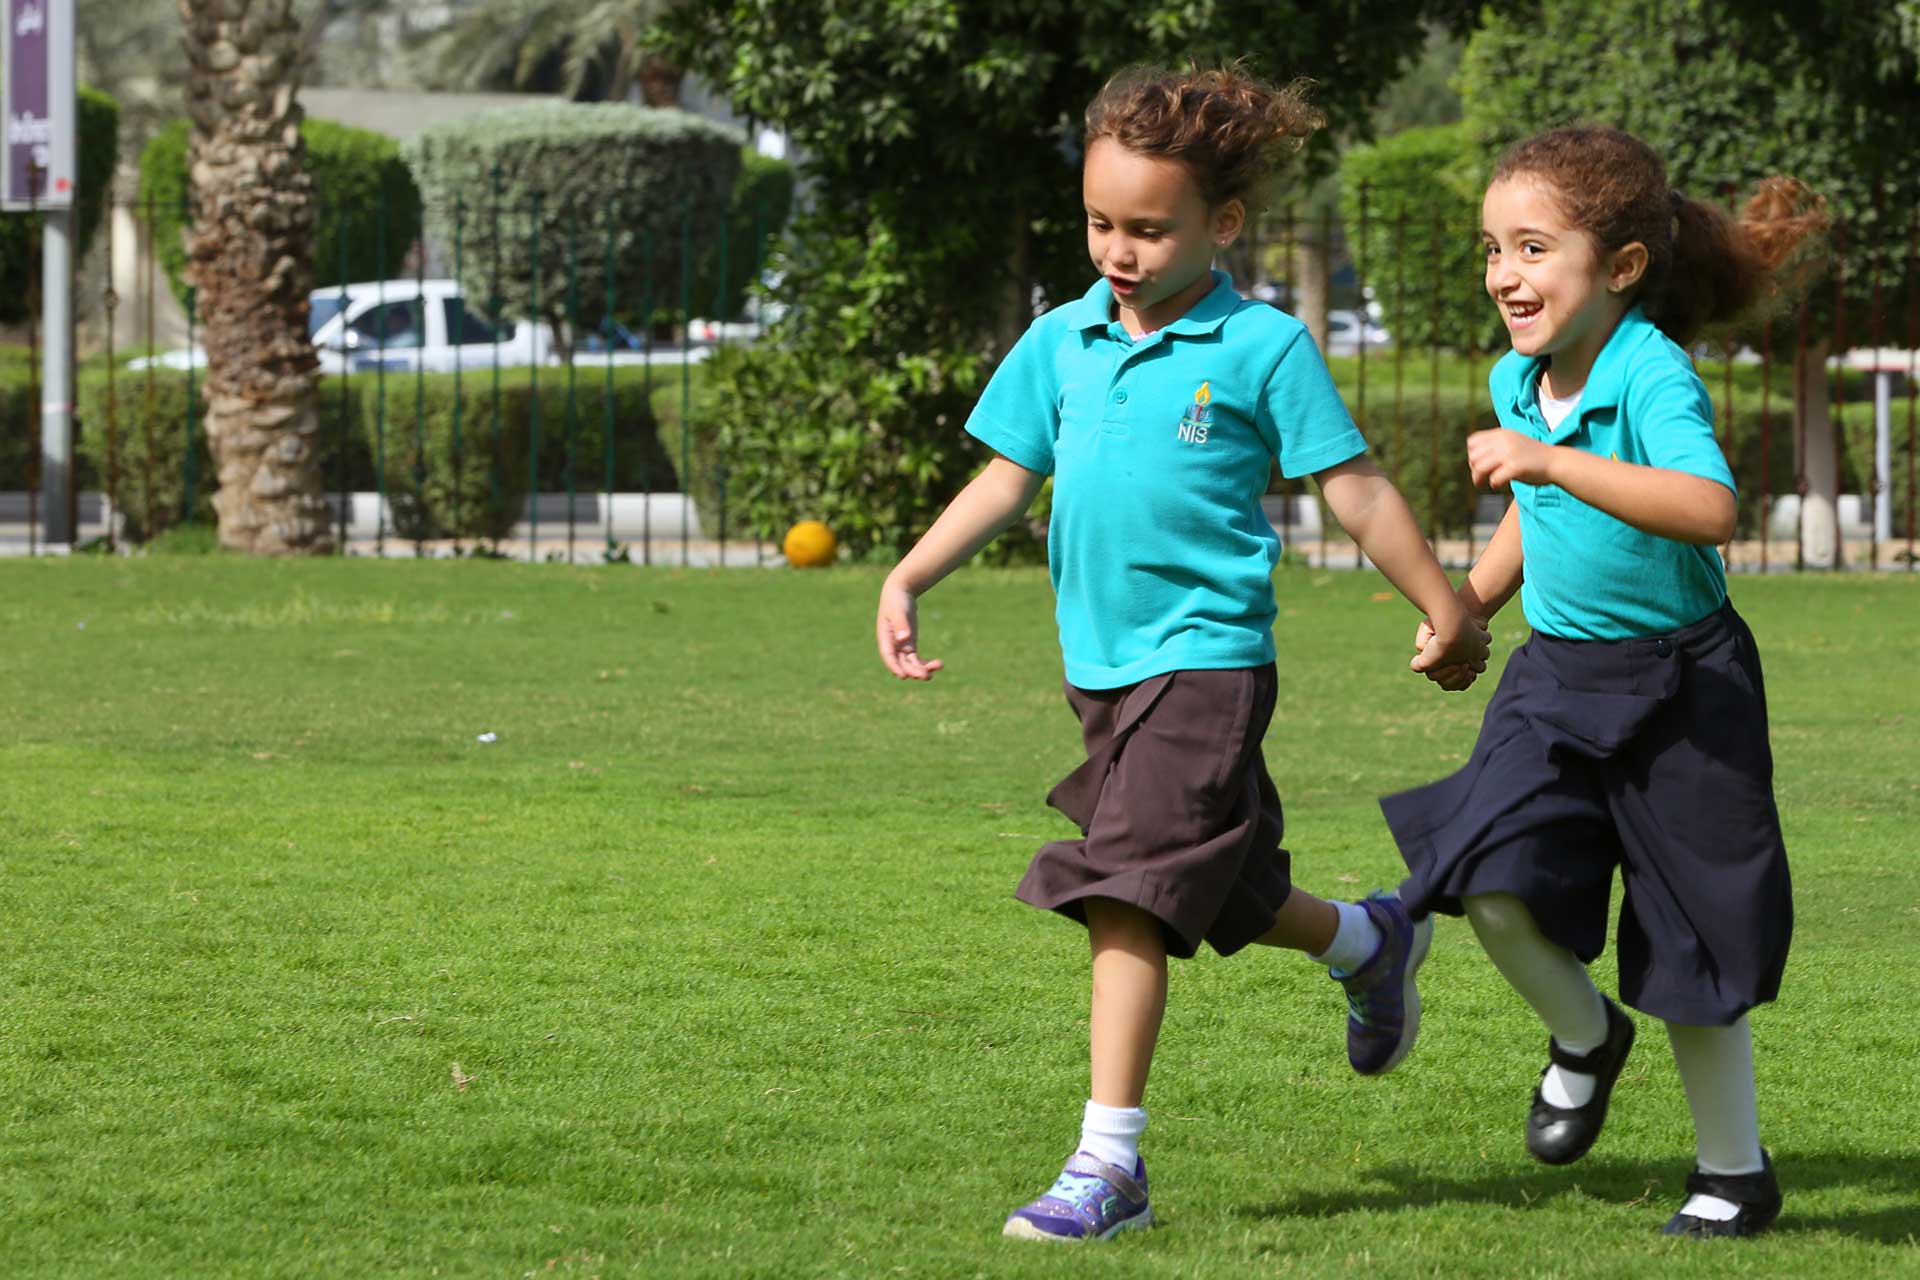 KHDA survey shows NIS students are happy and connect well with their teachers